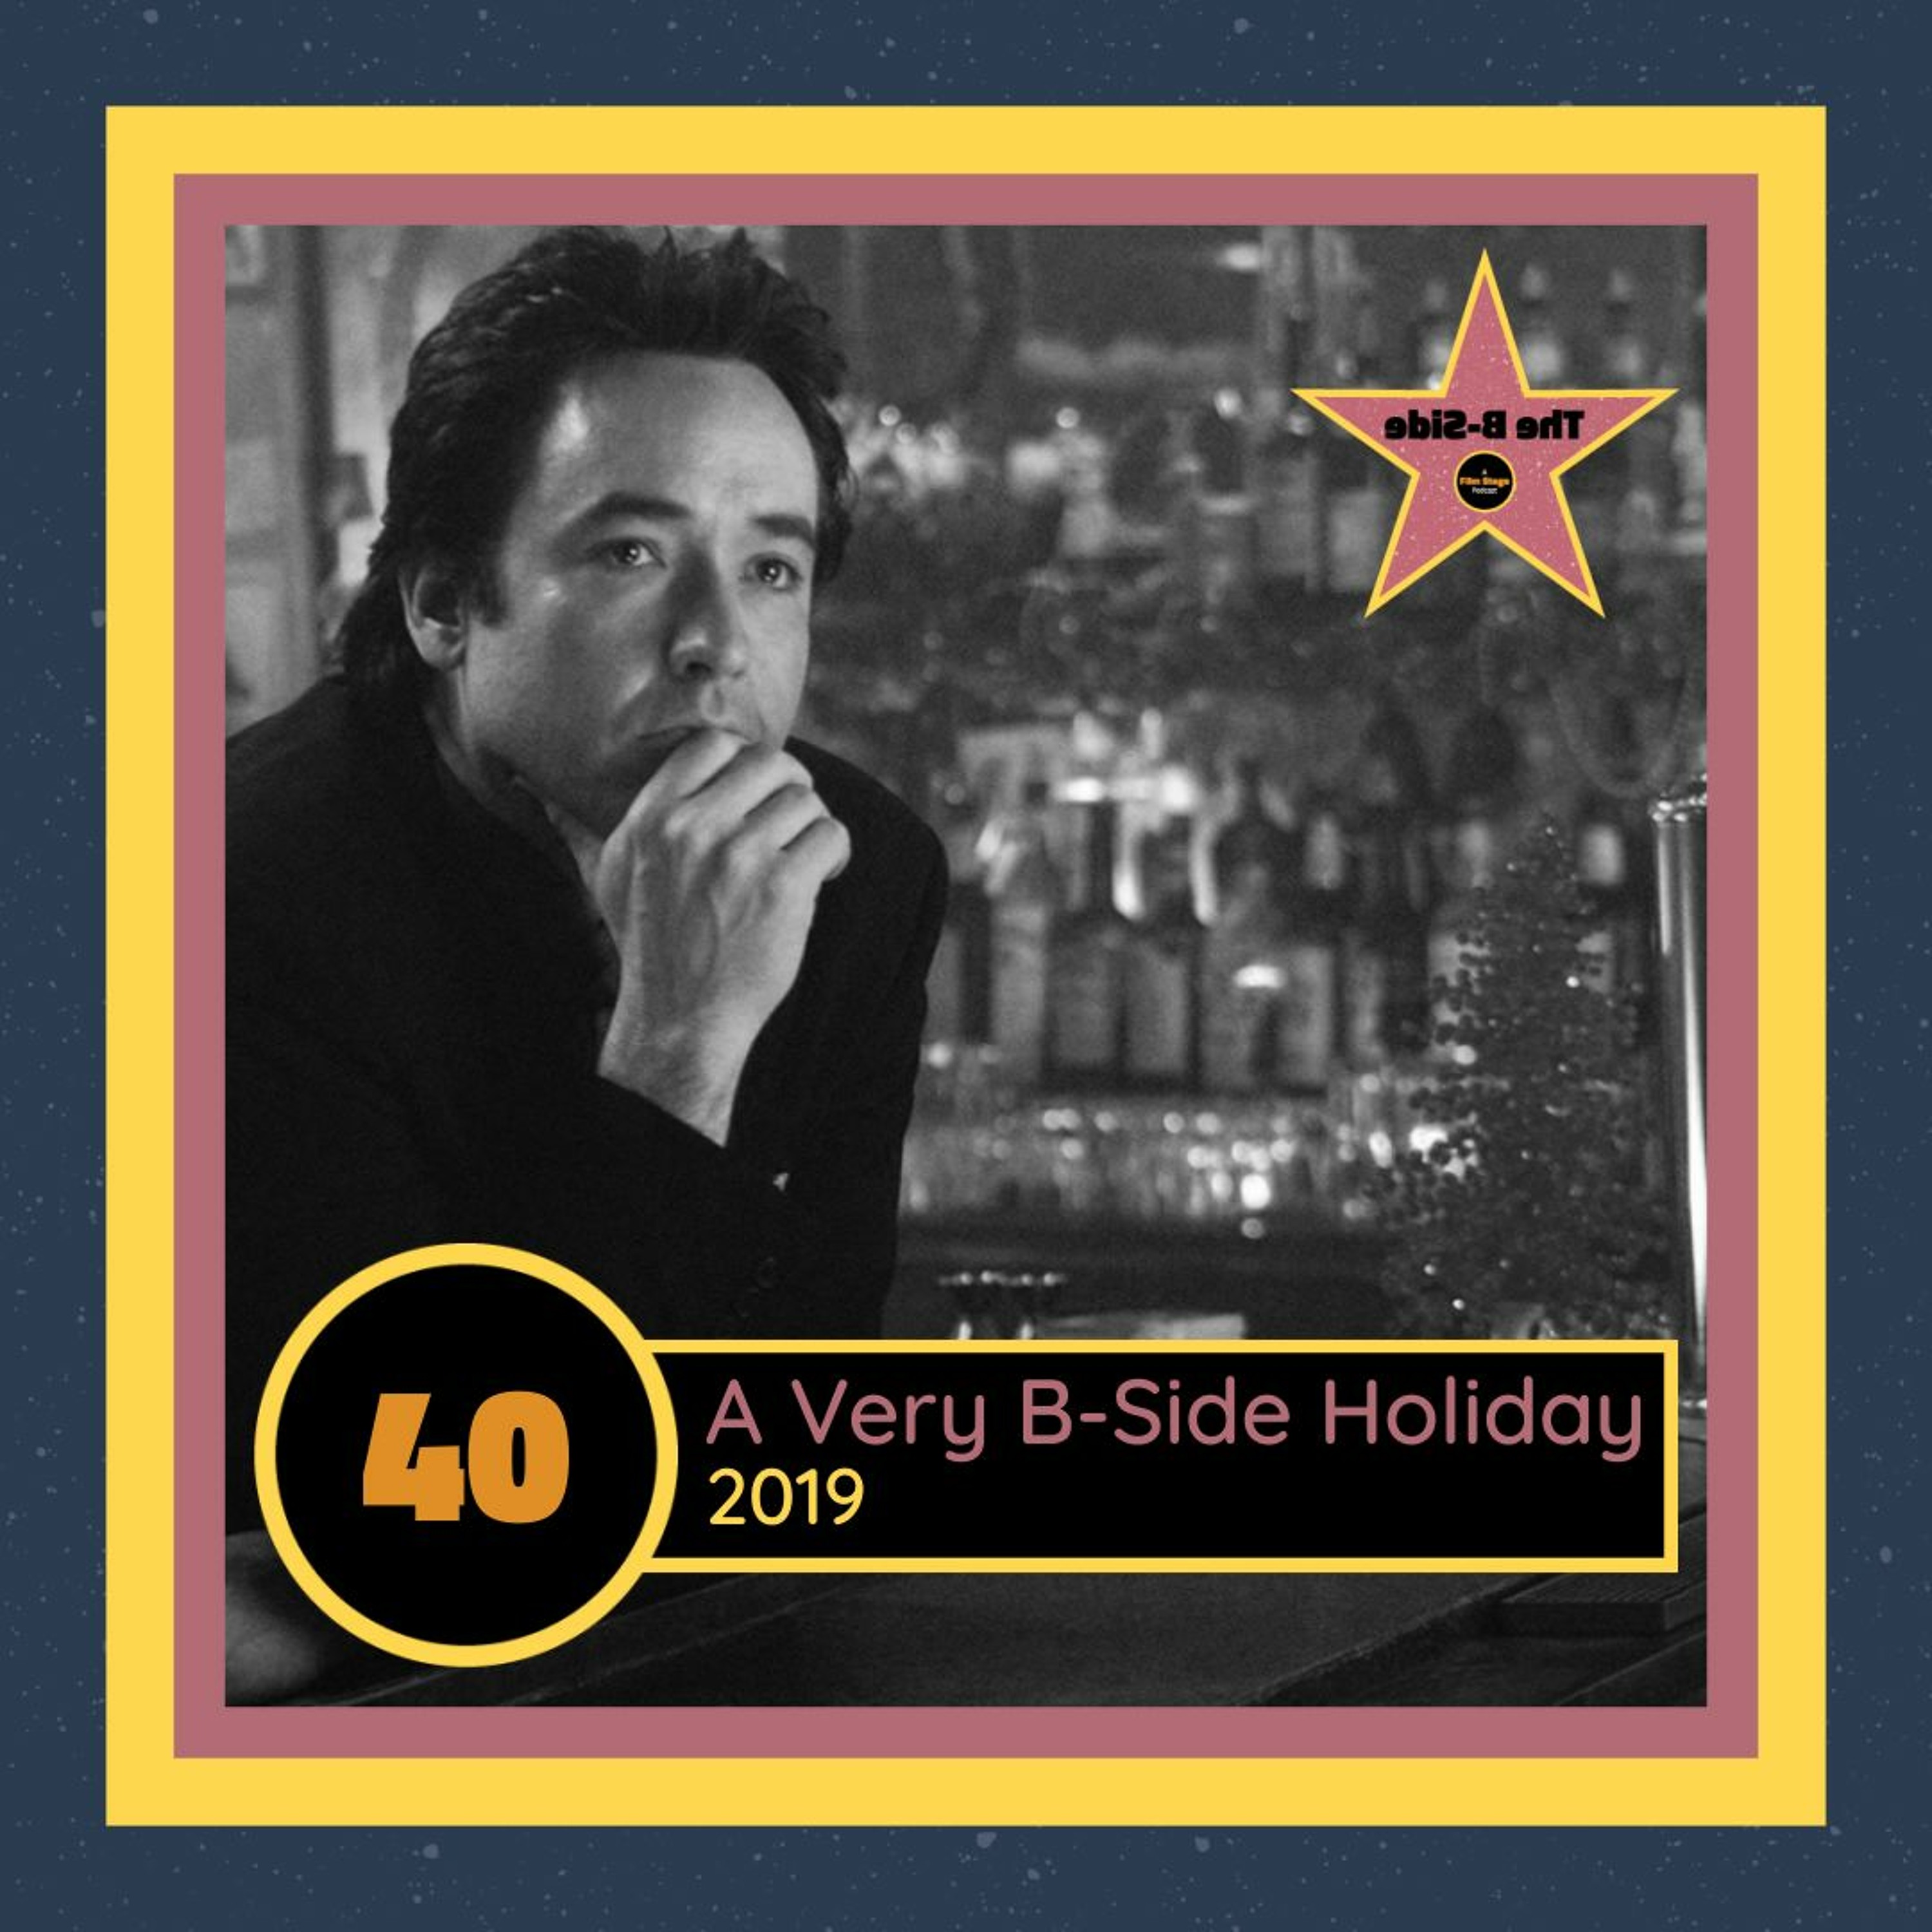 Ep. 40 – A Very B-Side Holiday